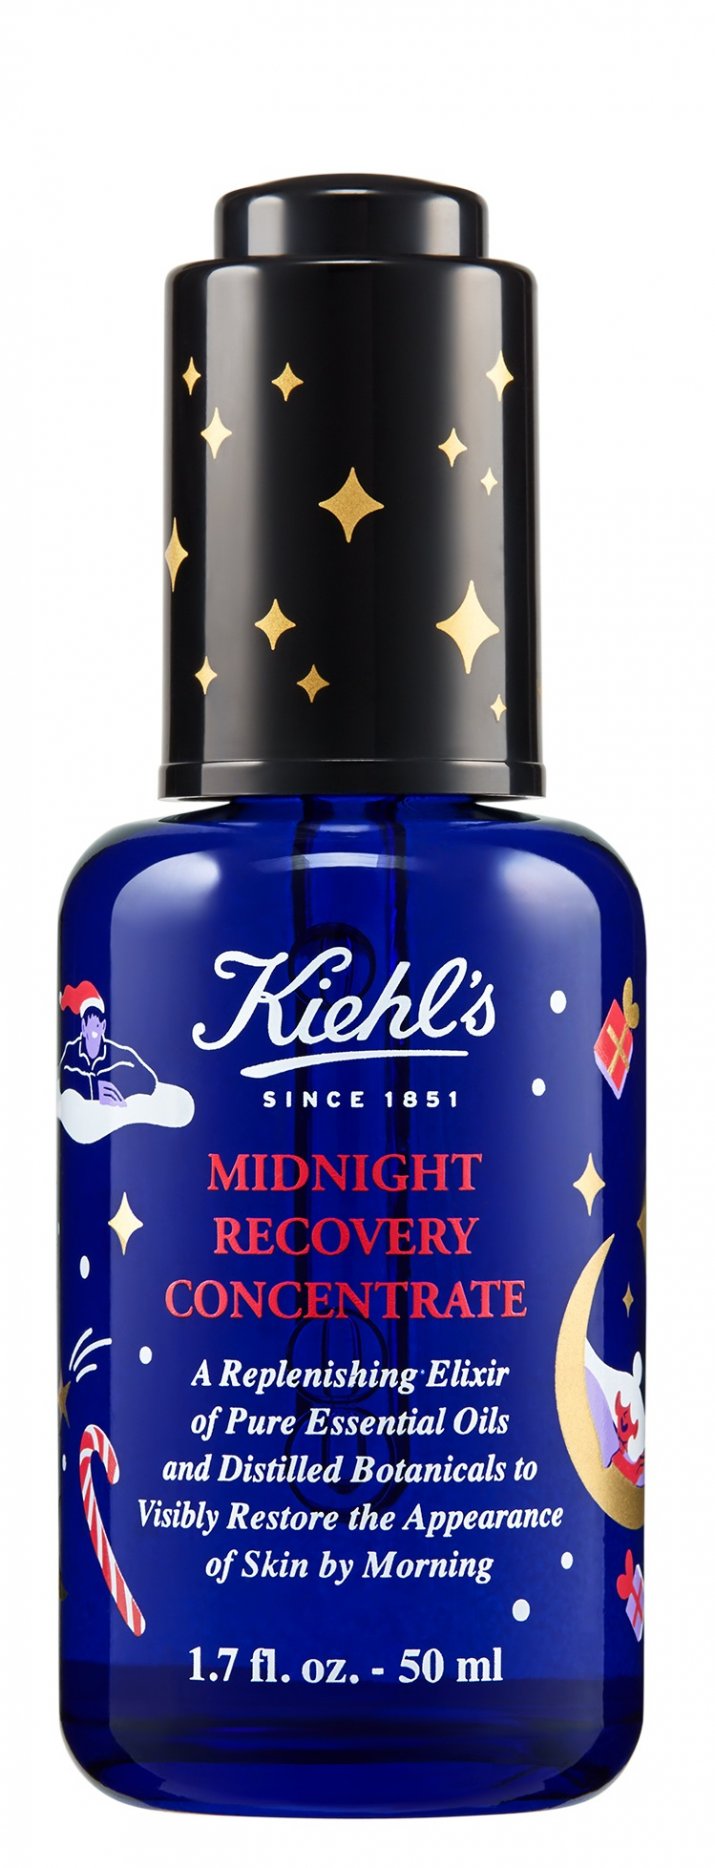 kiehls-holiday-2021-face-serum-midnight-recovery-concentrate-50ml-3605972620408-front